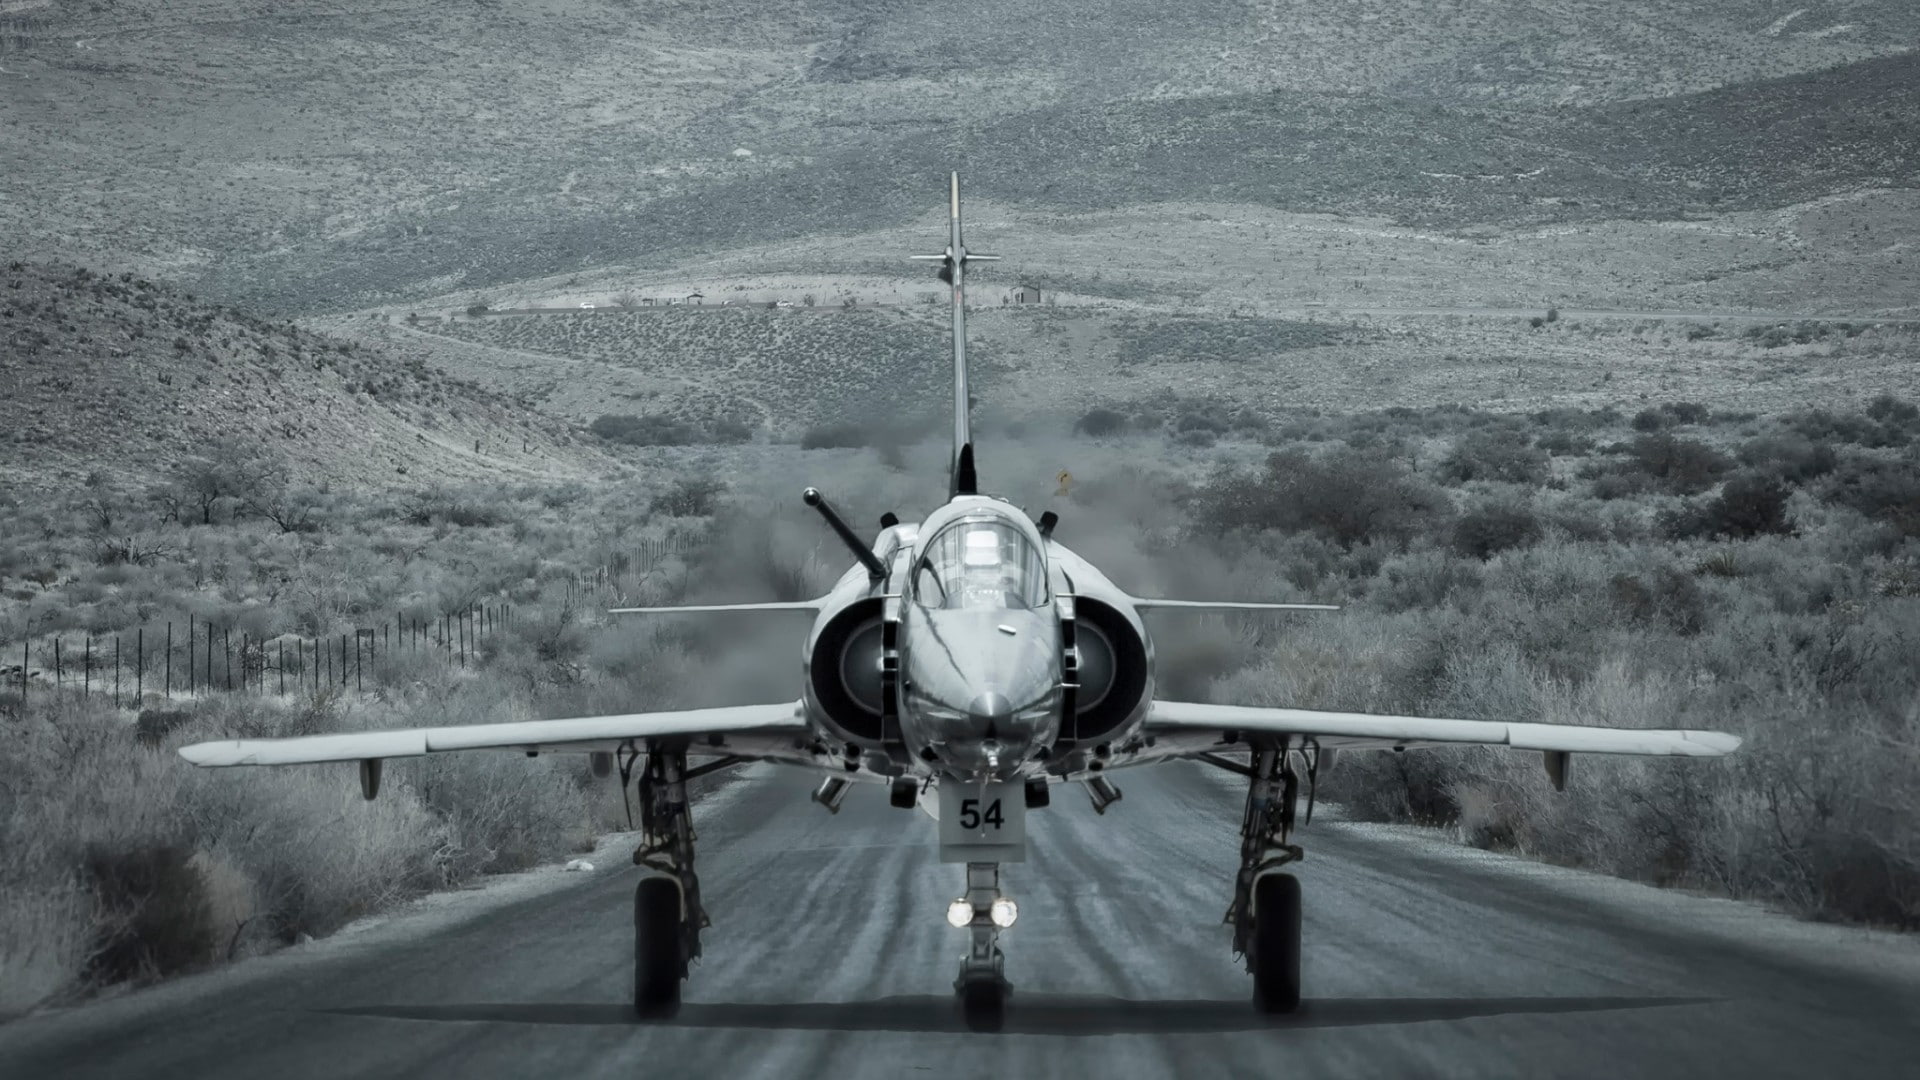 Mirage 2000, aircraft, monochrome, military, jet fighter, air vehicle